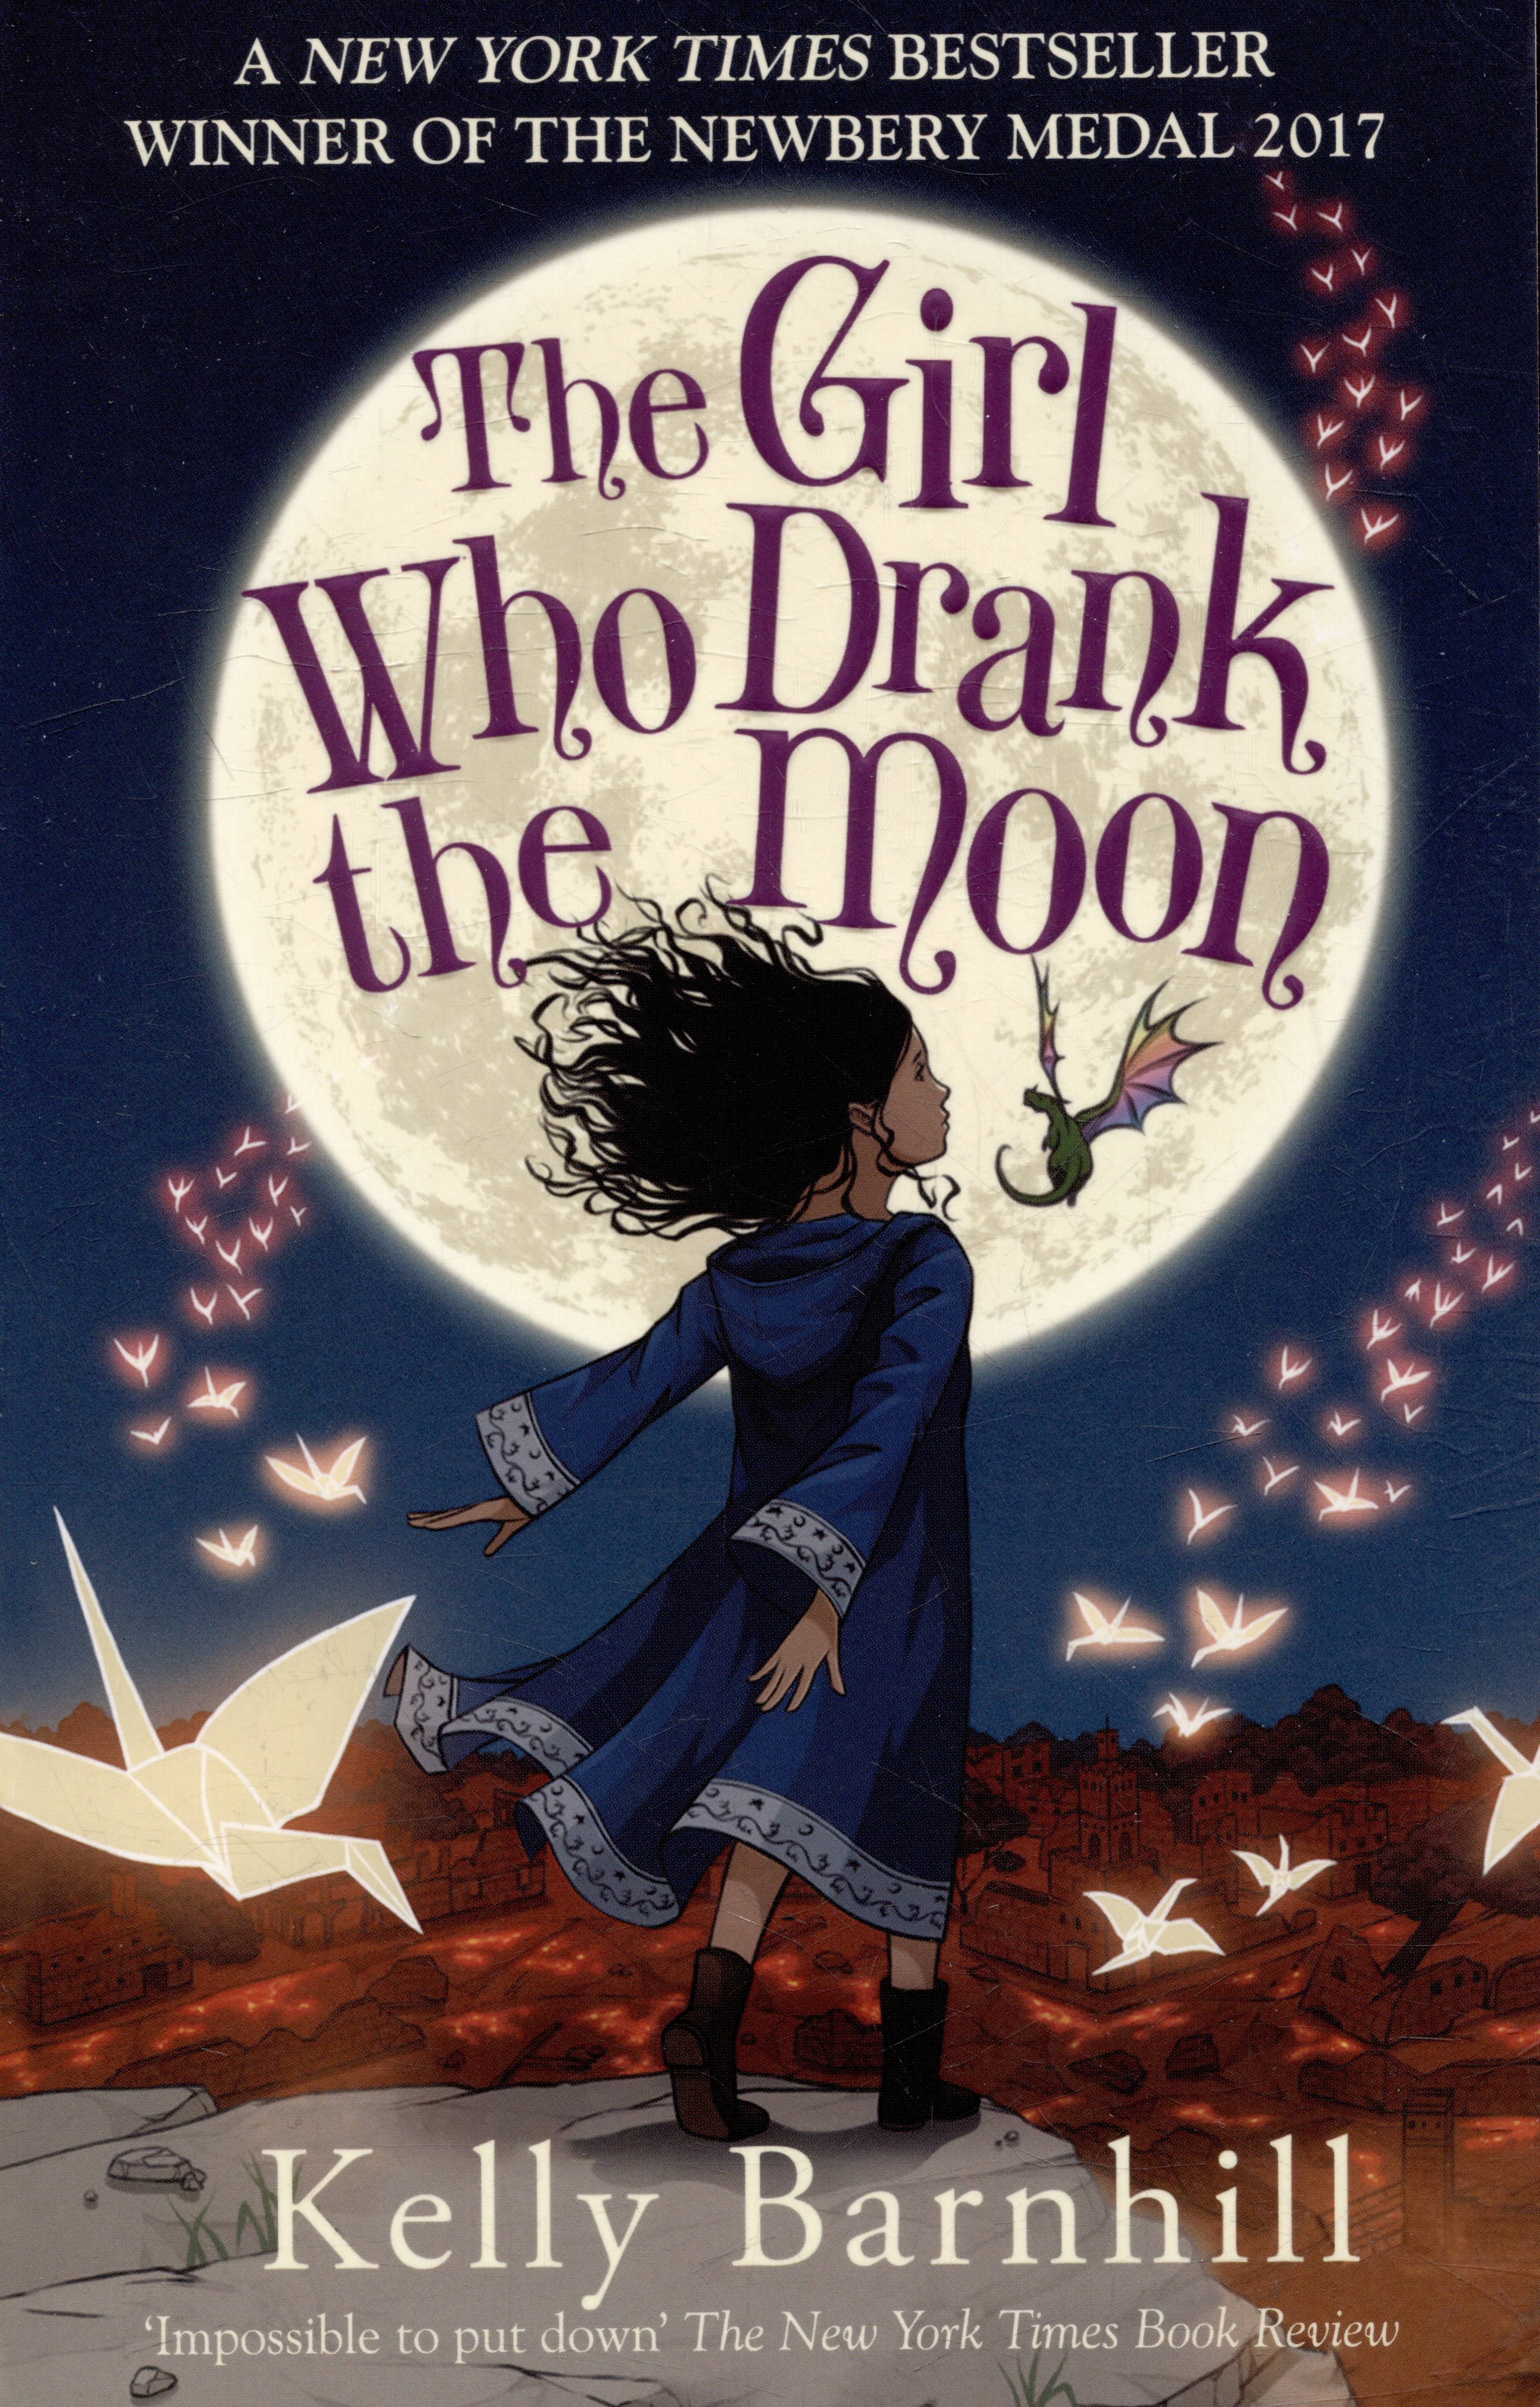 The Girl Who Drank the Moon deestone d932 swamp witch 10 00 28 r12